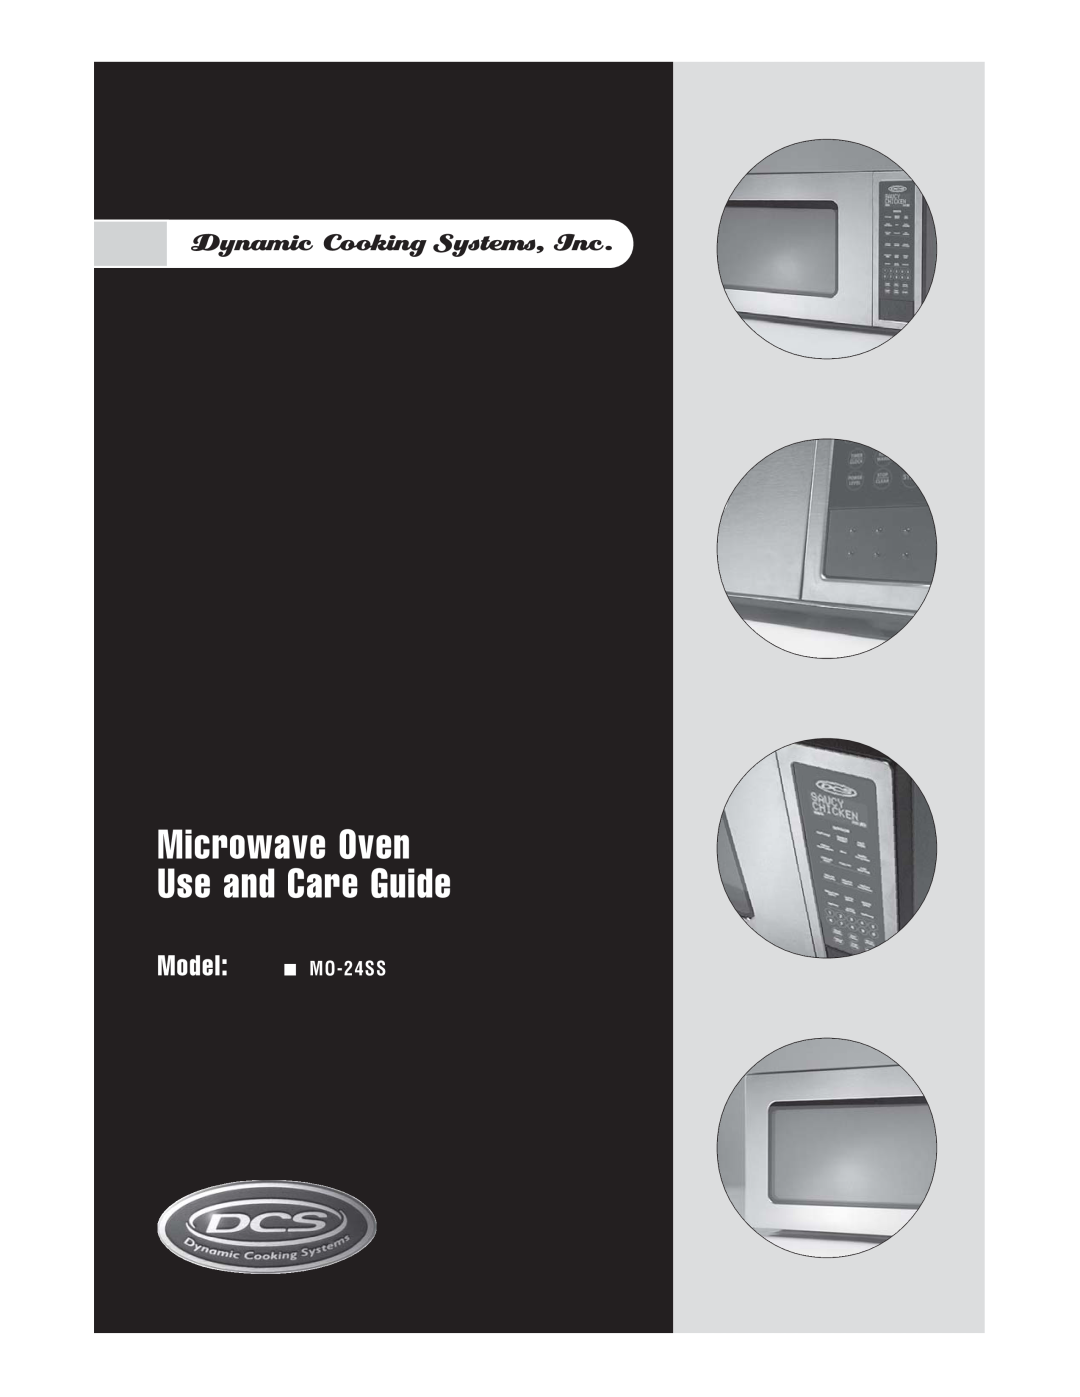 DCS manual Dynamic Cooking Systems, Inc, Microwave Oven Use and Care Guide, Model: MO-24SS 